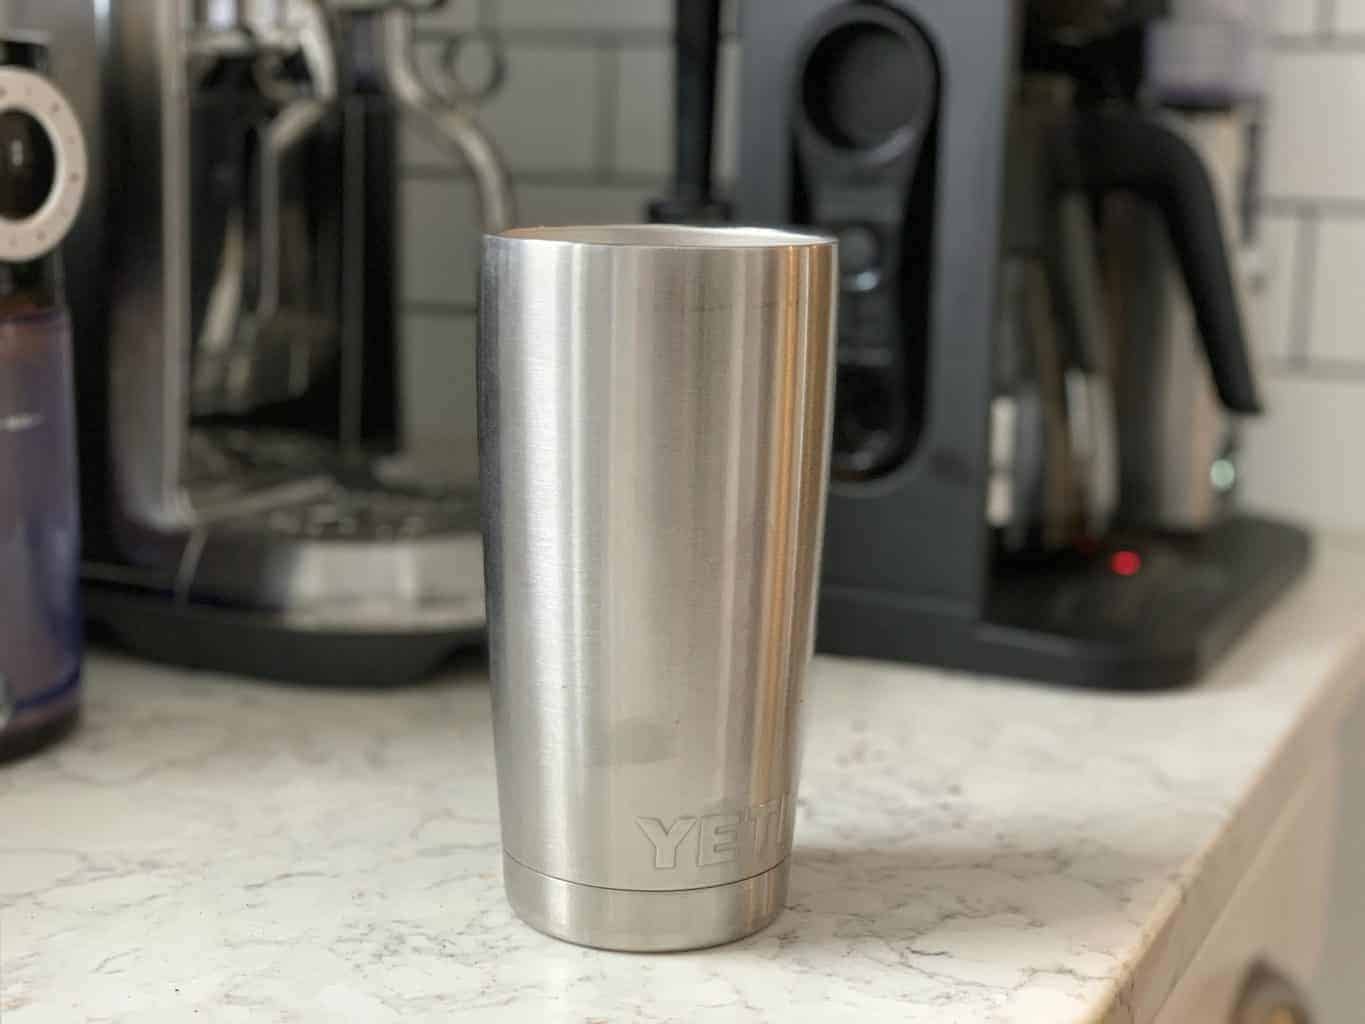 The Best Travel Mugs to Keep Your Coffee Hot 2021 Reviews